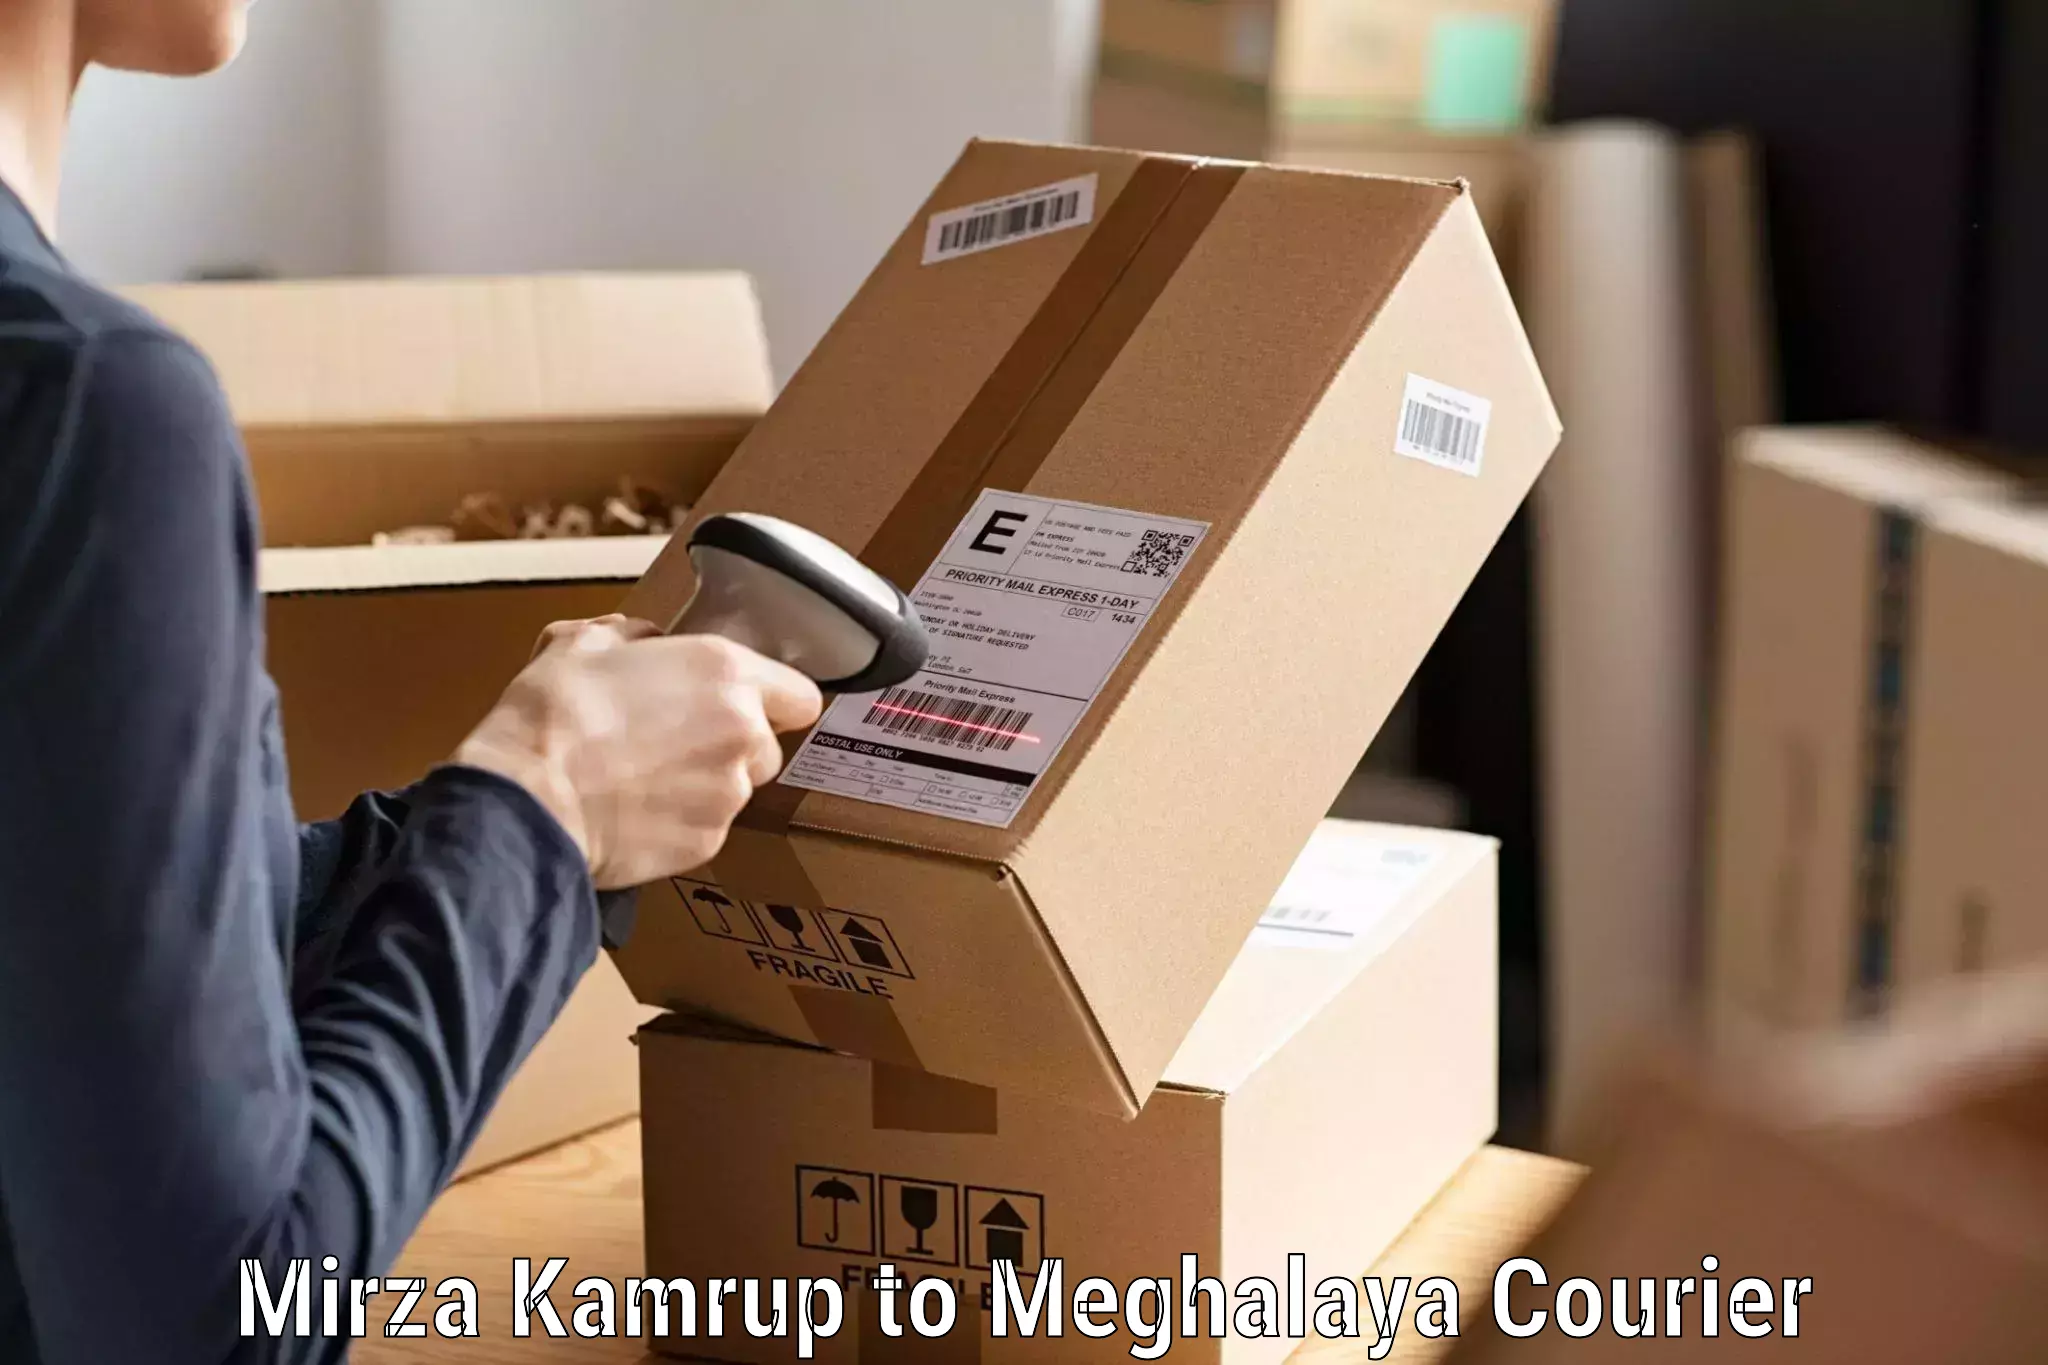 Residential courier service Mirza Kamrup to Ri Bhoi